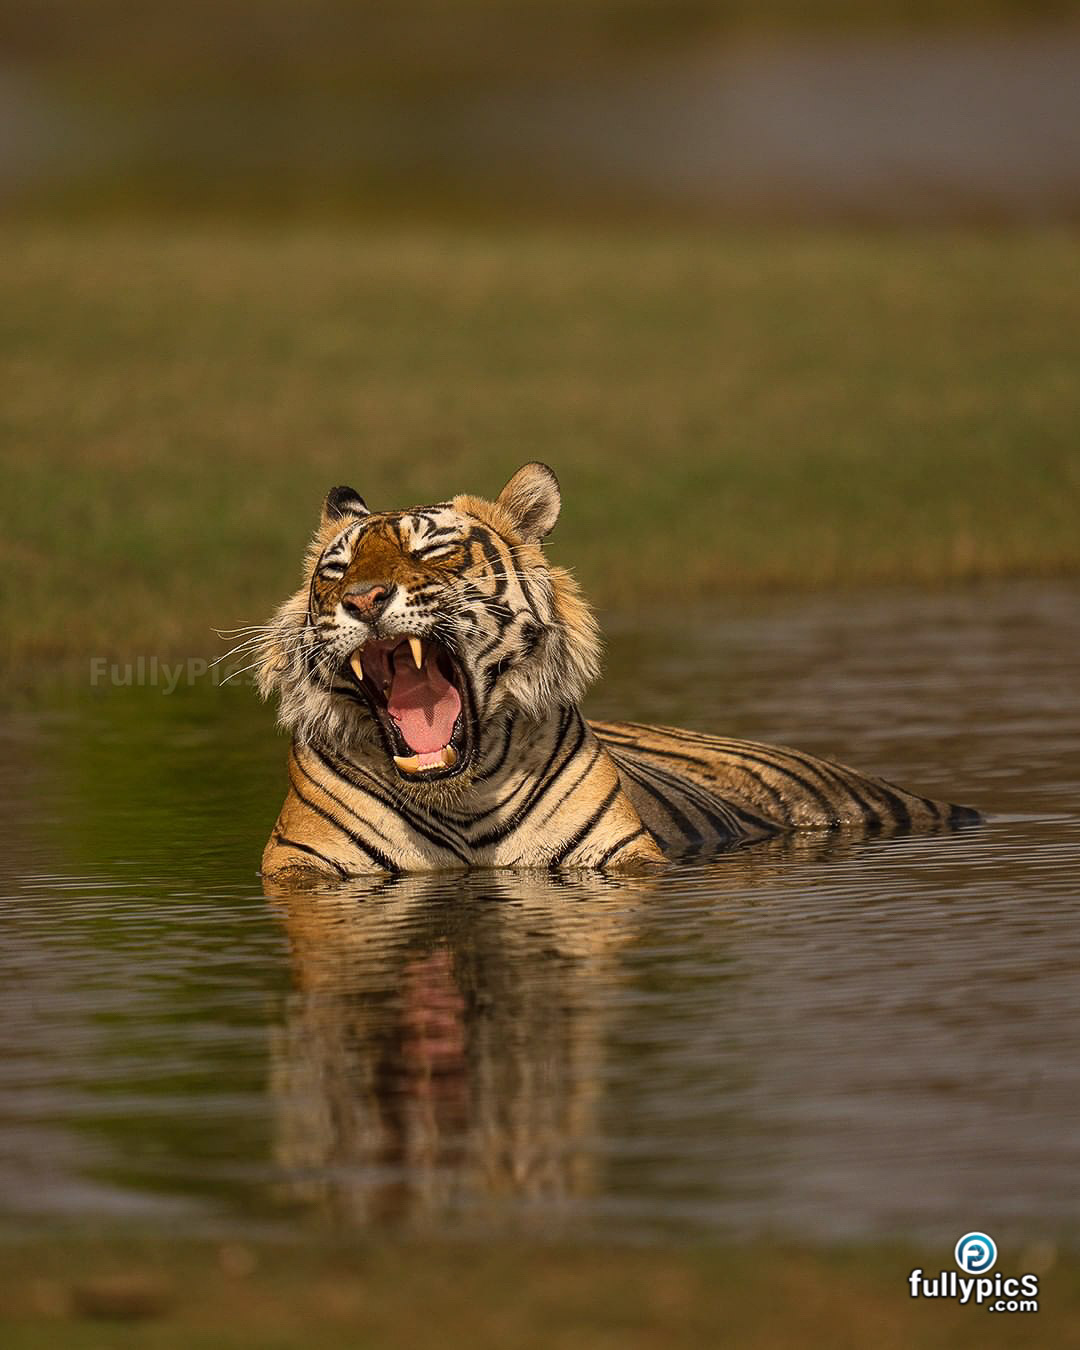 Tiger HD Picture Gallery